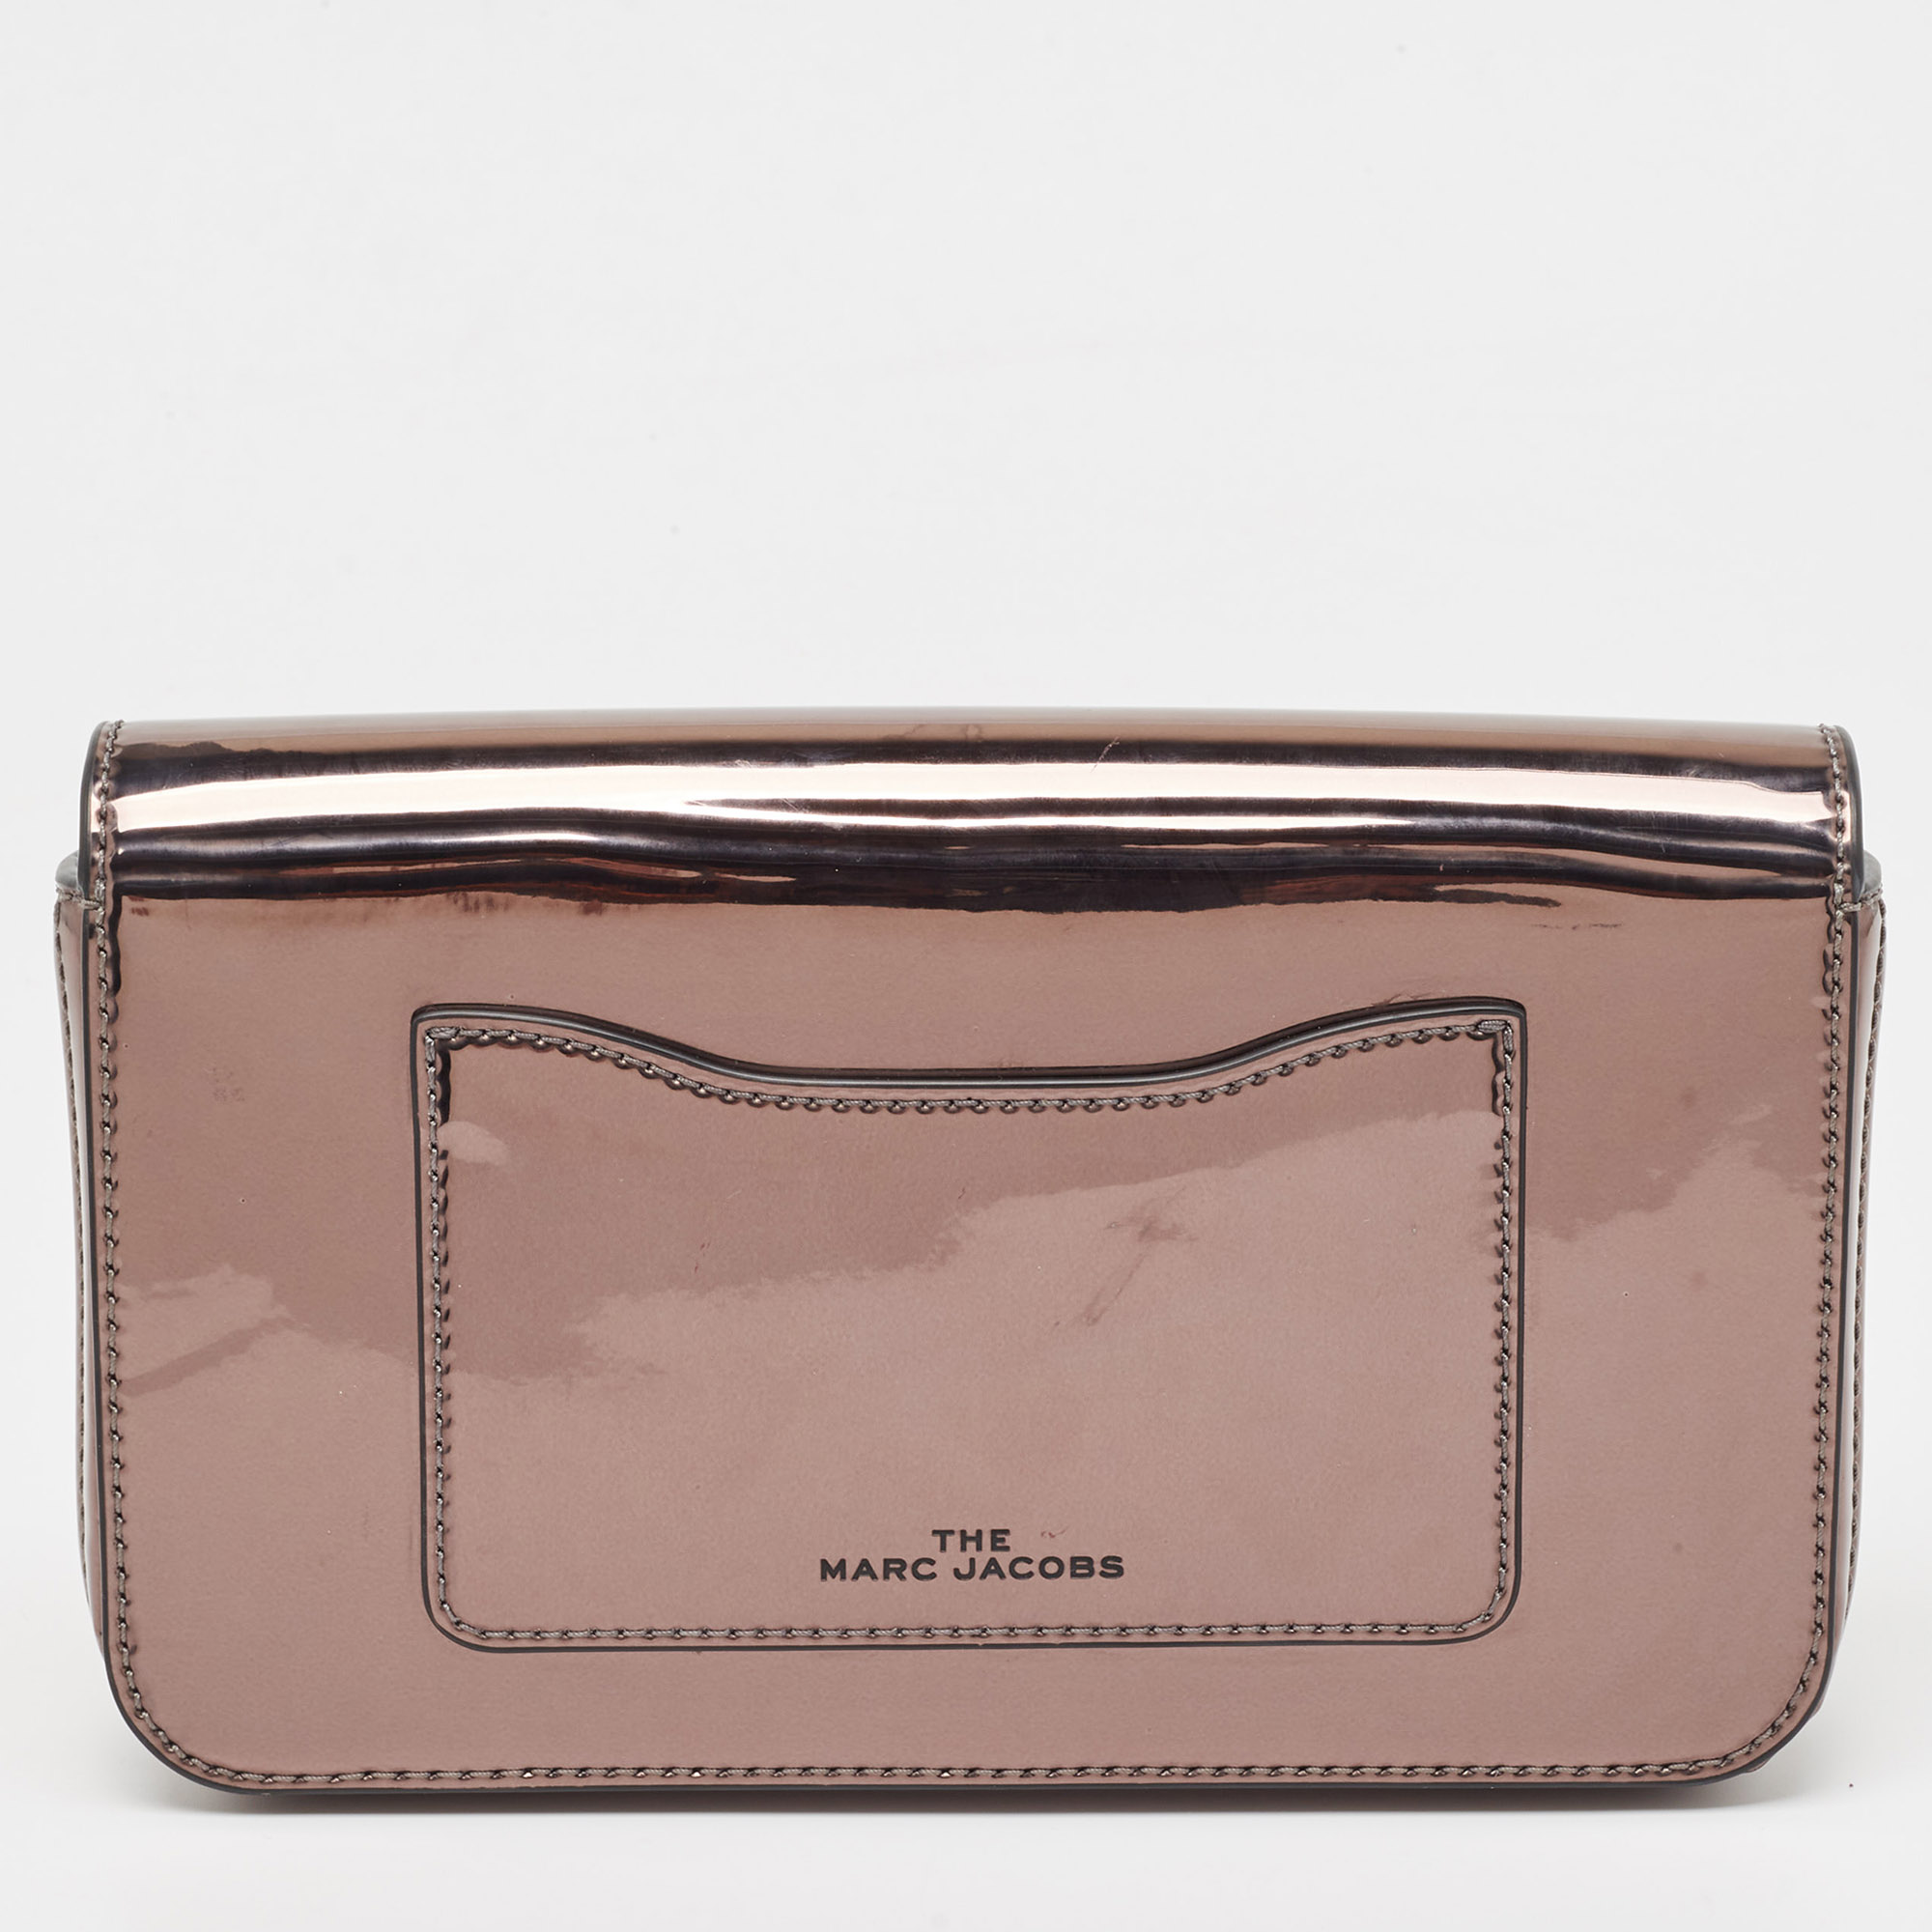 Marc Jacobs Grey Patent Leather The Long Shot Mirrored Clutch